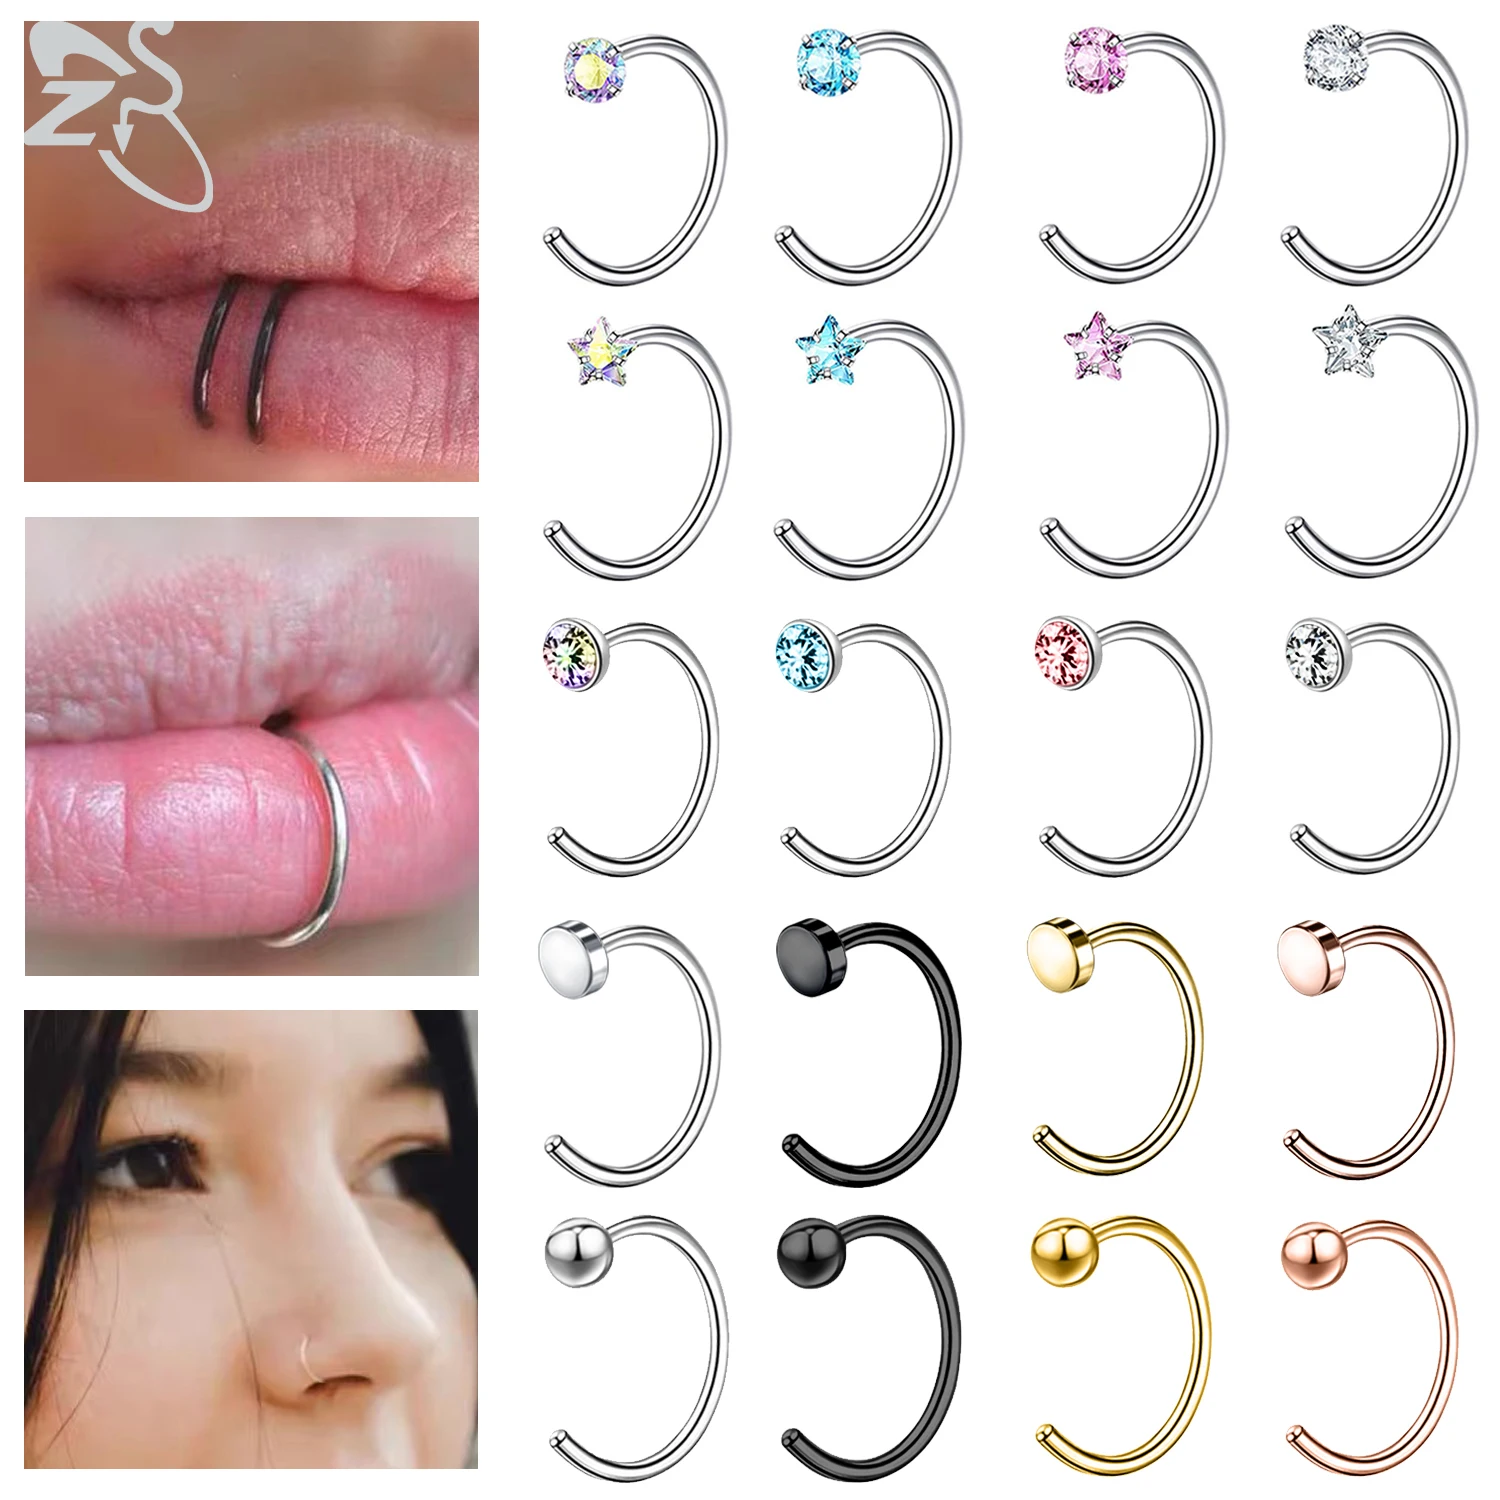 

ZS 1PC Stainless Steel Round Nose Rings Crystal Star Hoop Septum Rings C Clip Lip Ring Ear Helix Cartilage Tragus Piercings 20G